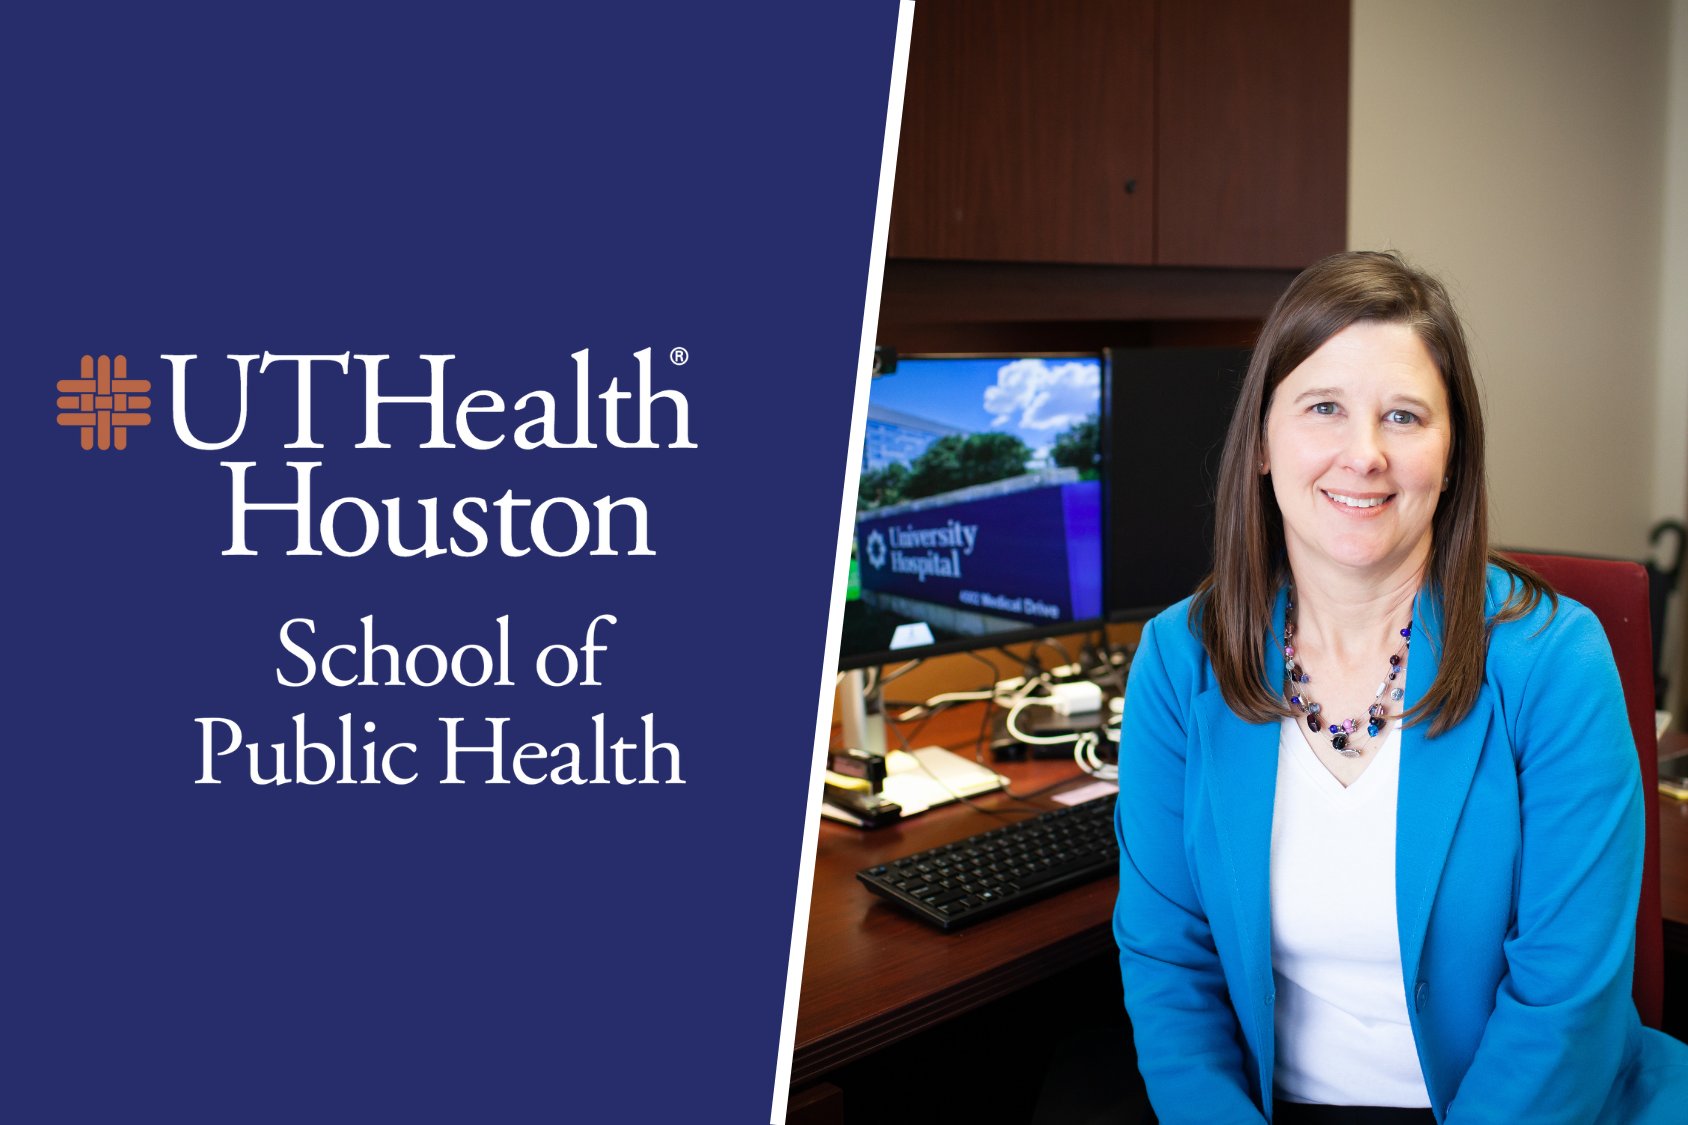 Carol Huber, DrPH, is the newest faculty member in San Antonio, as well as deputy chief public health and equity officer at the University Health's Institute for Public Health.